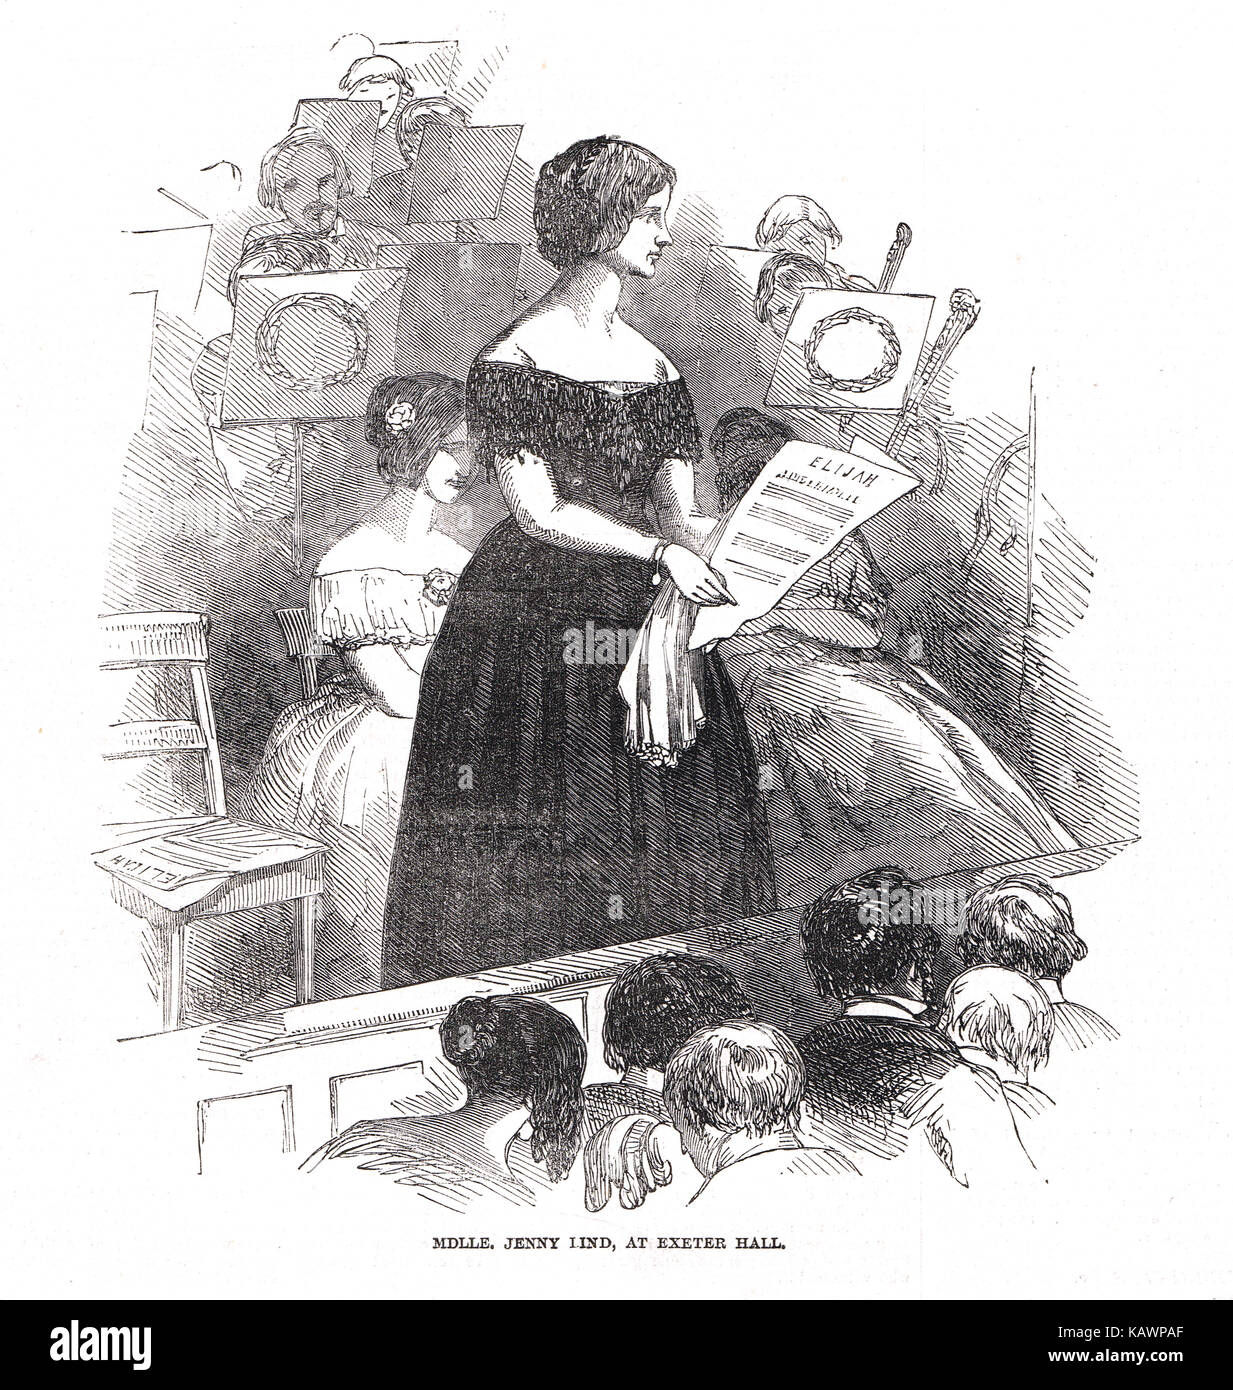 Jenny Lind, l'Usignolo svedese a Exeter Hall, 1848 Foto Stock